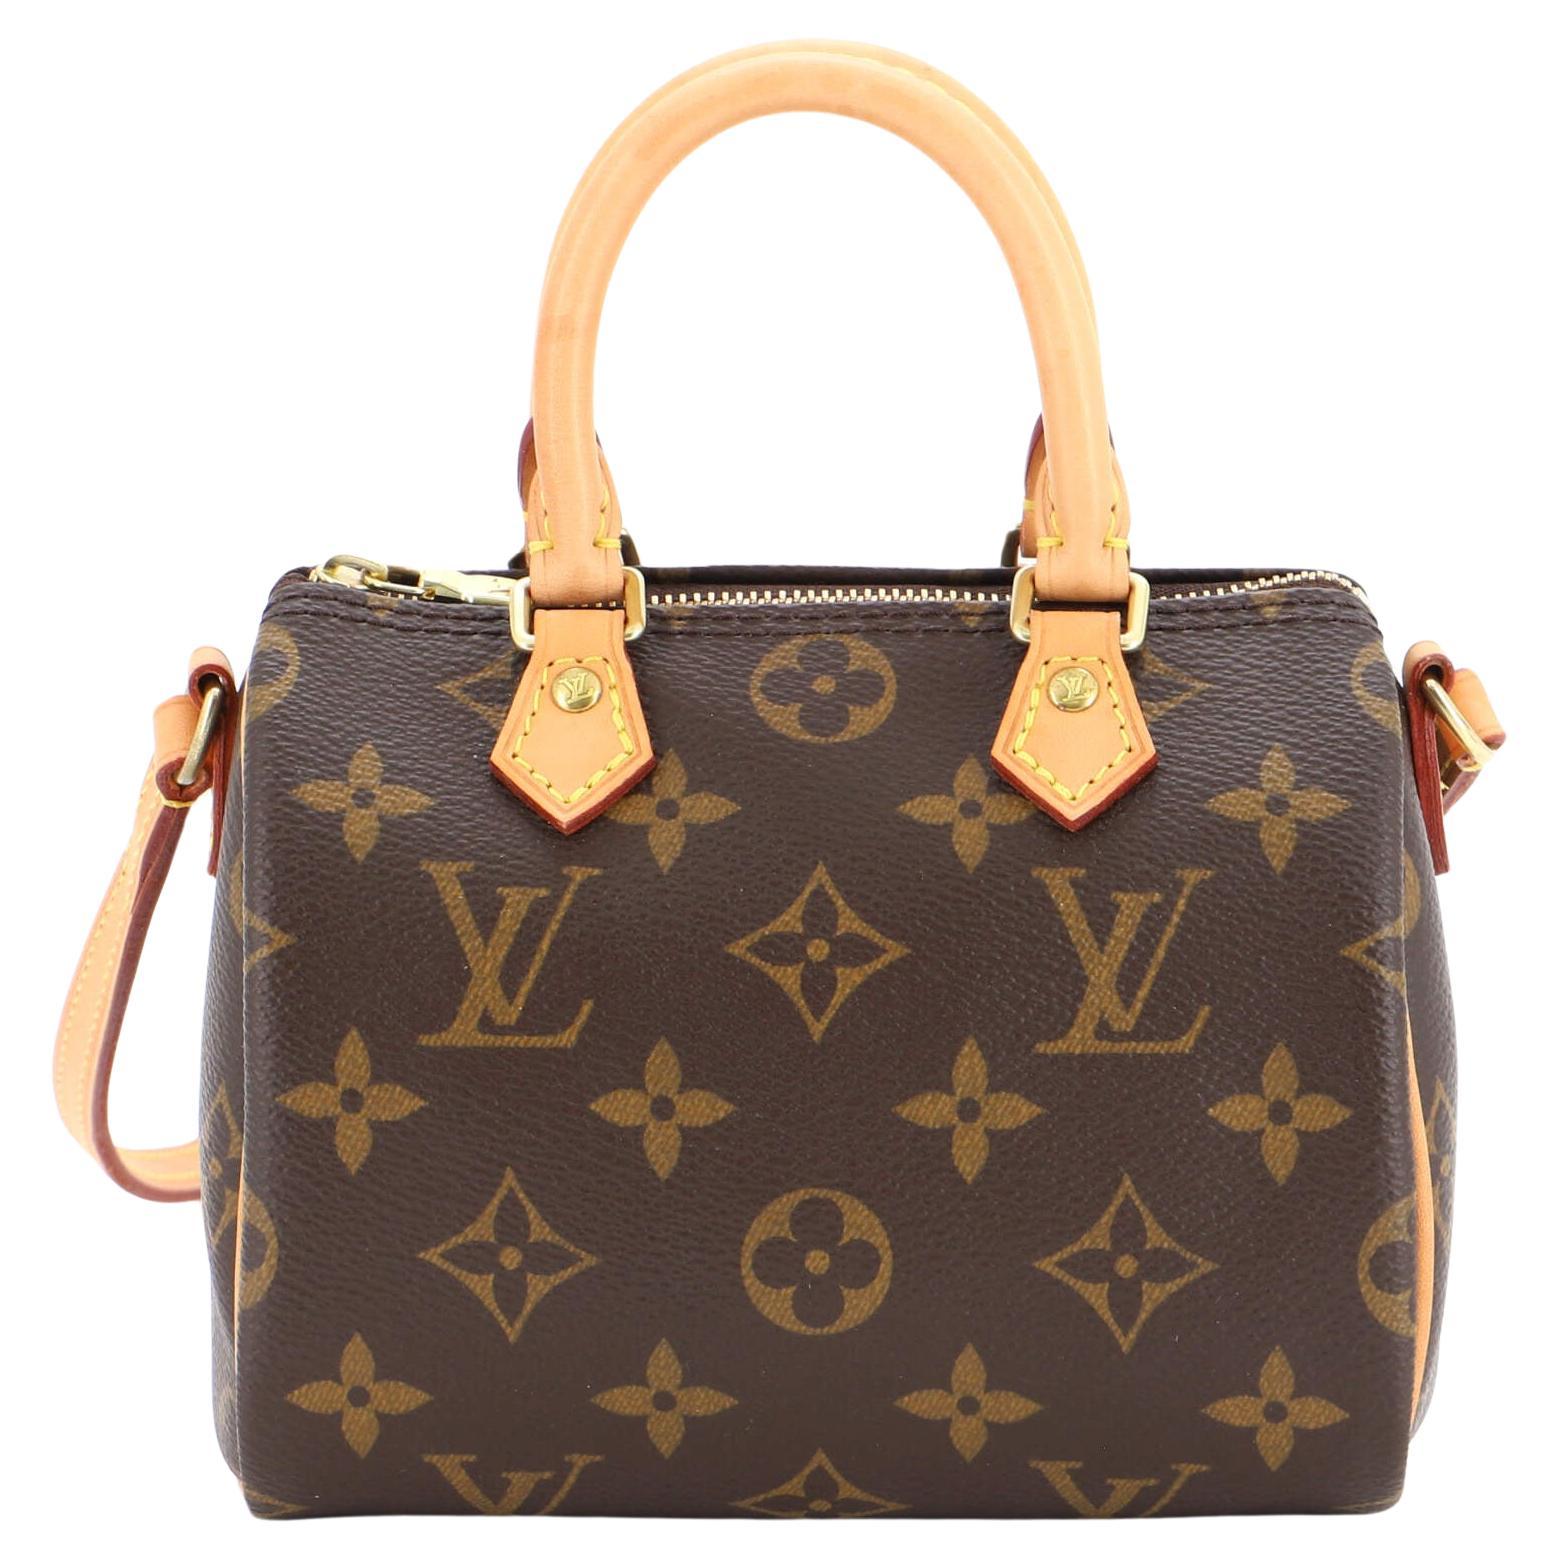 What is the smallest Louis Vuitton Speedy bag? - Questions